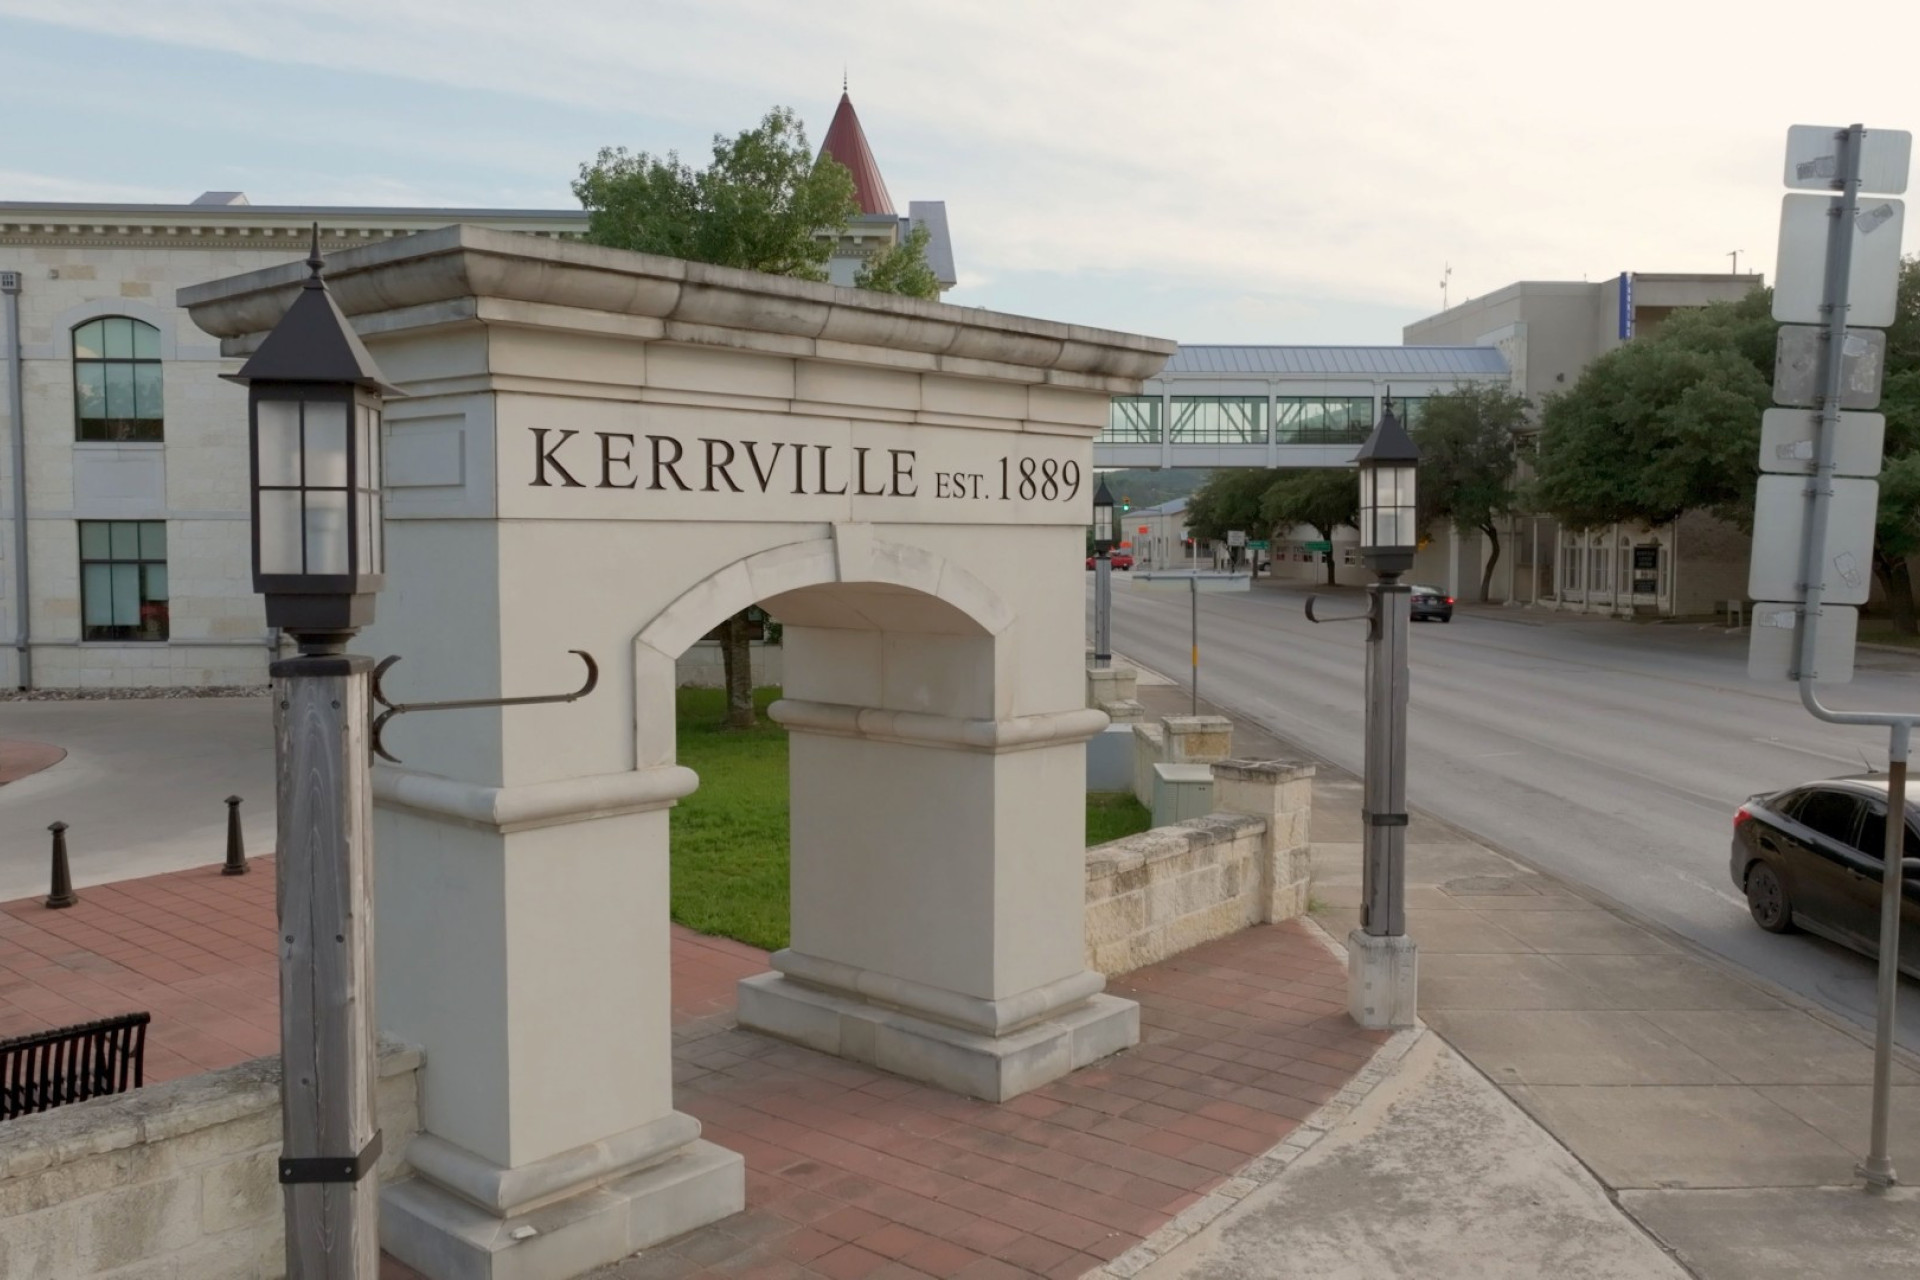 Kerville stone sign